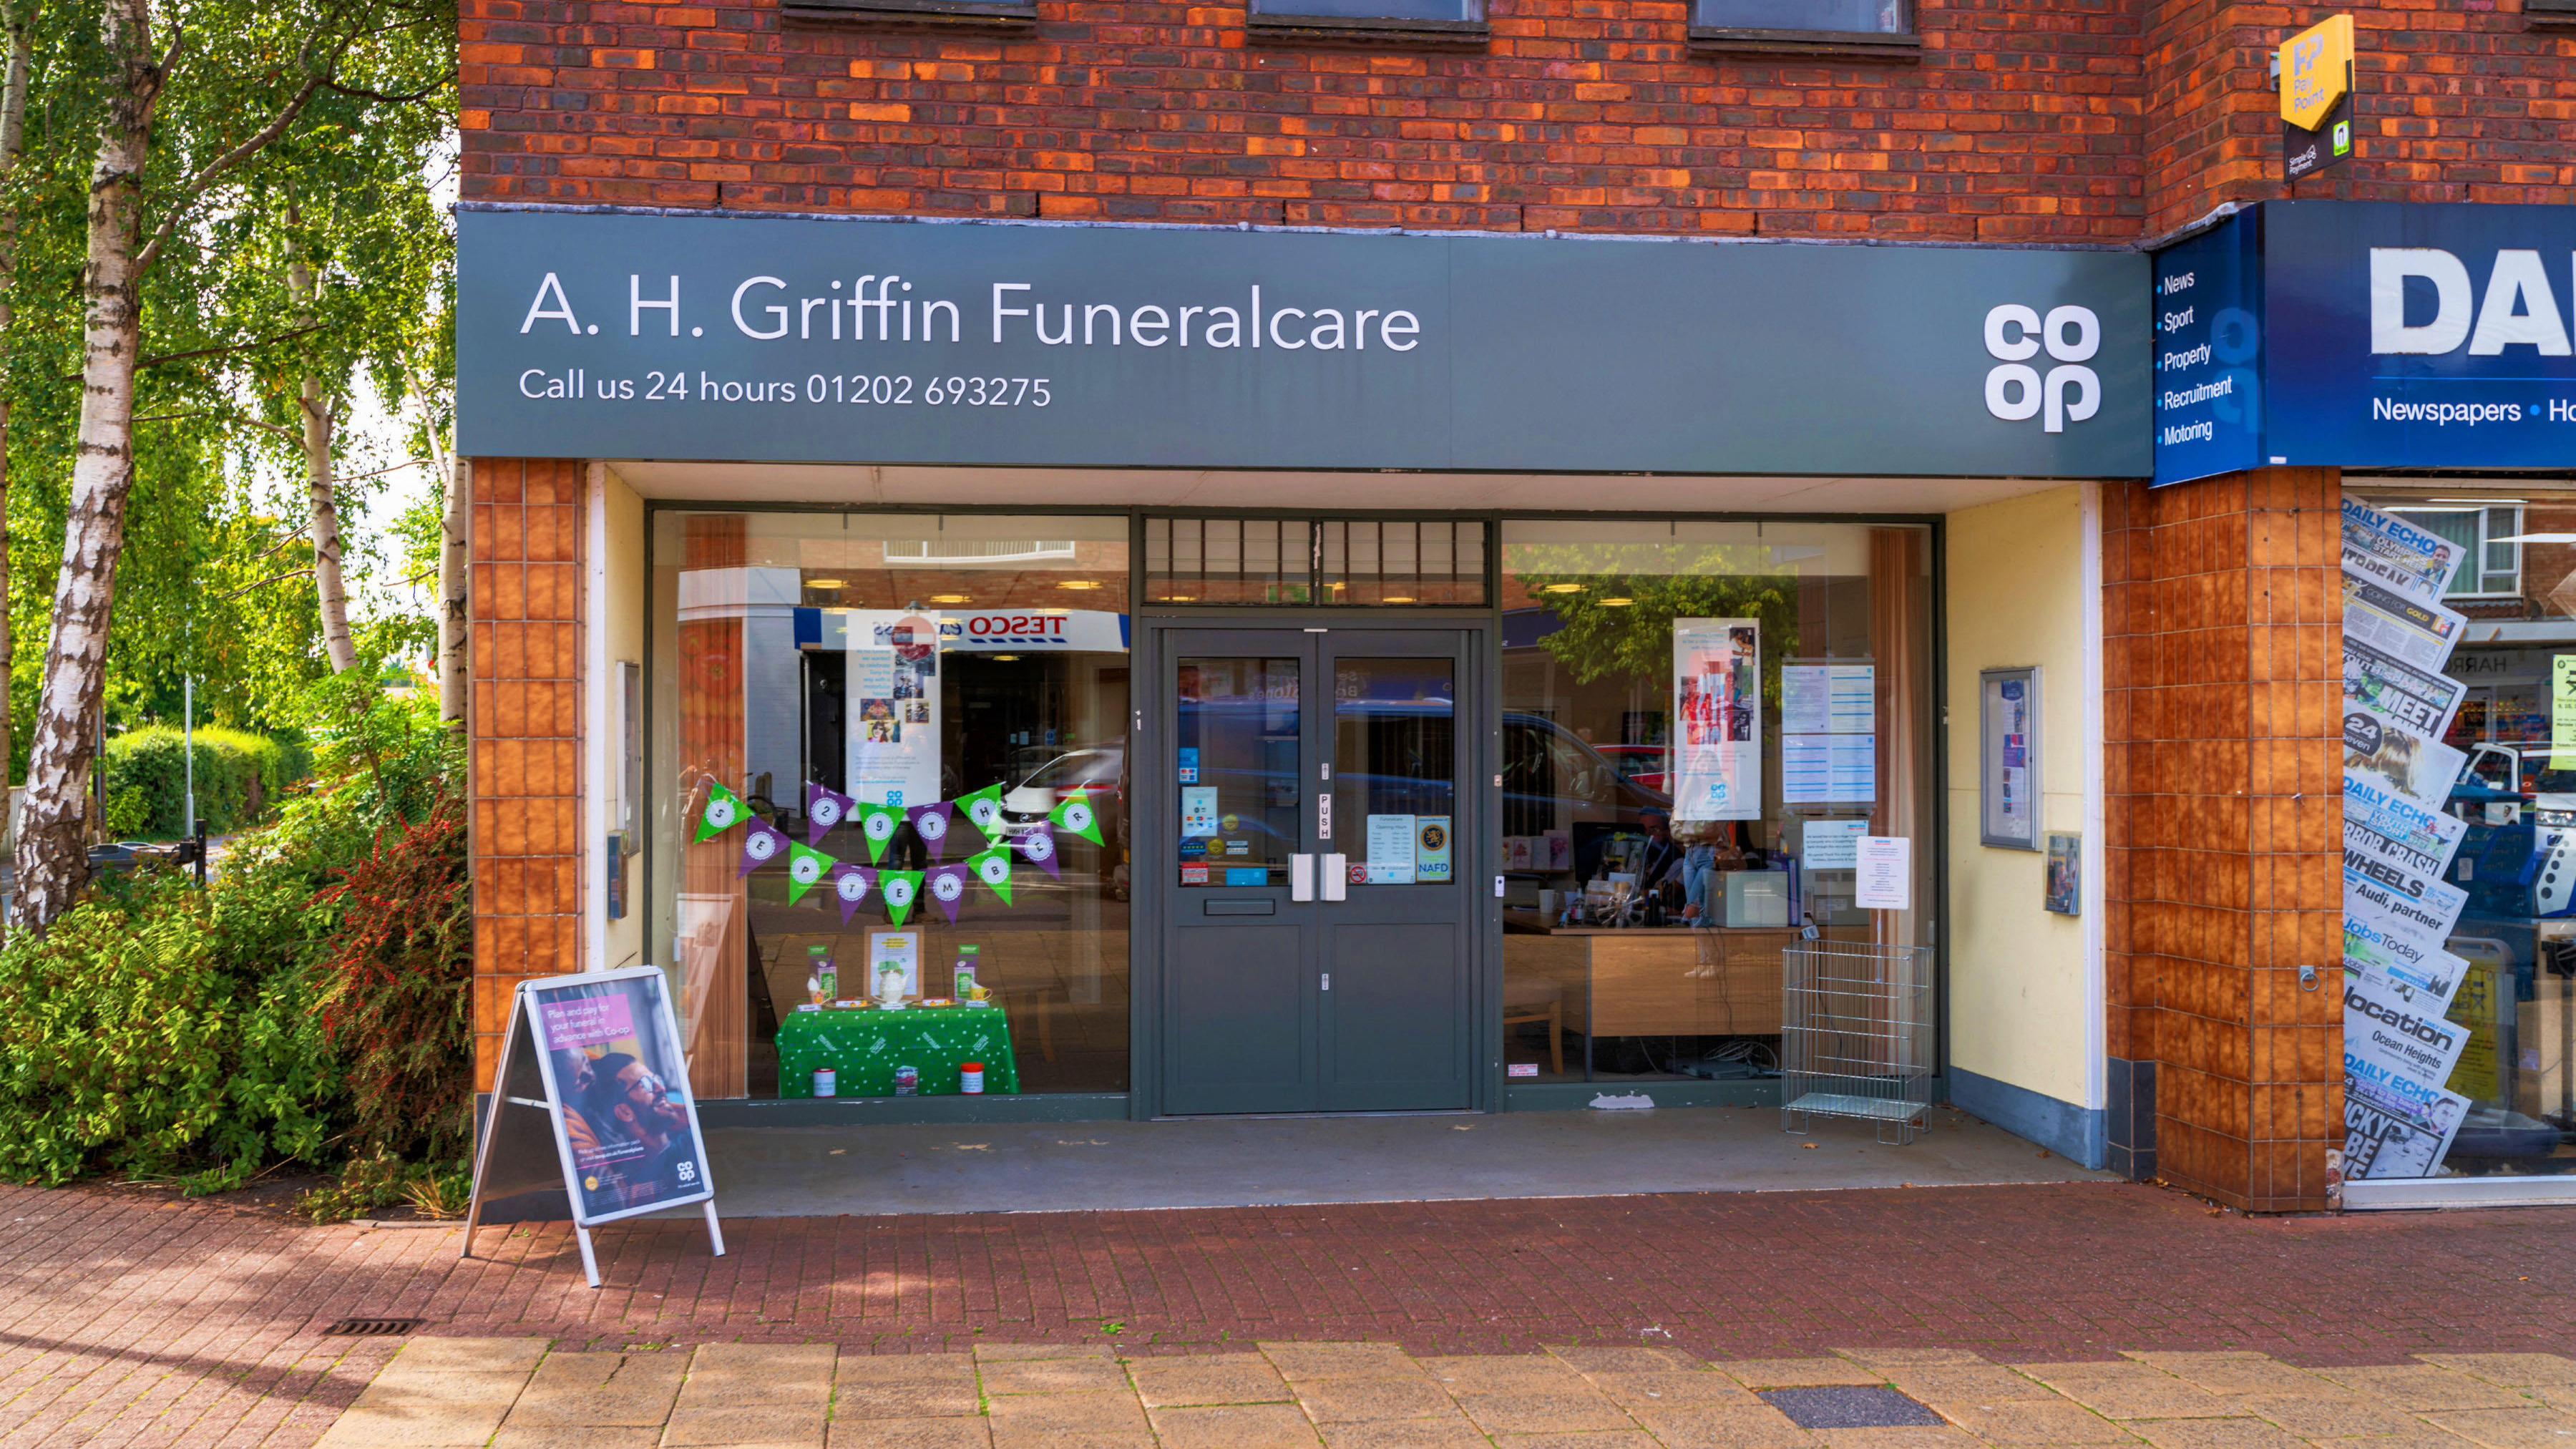 Images A. H. Griffin Funeralcare